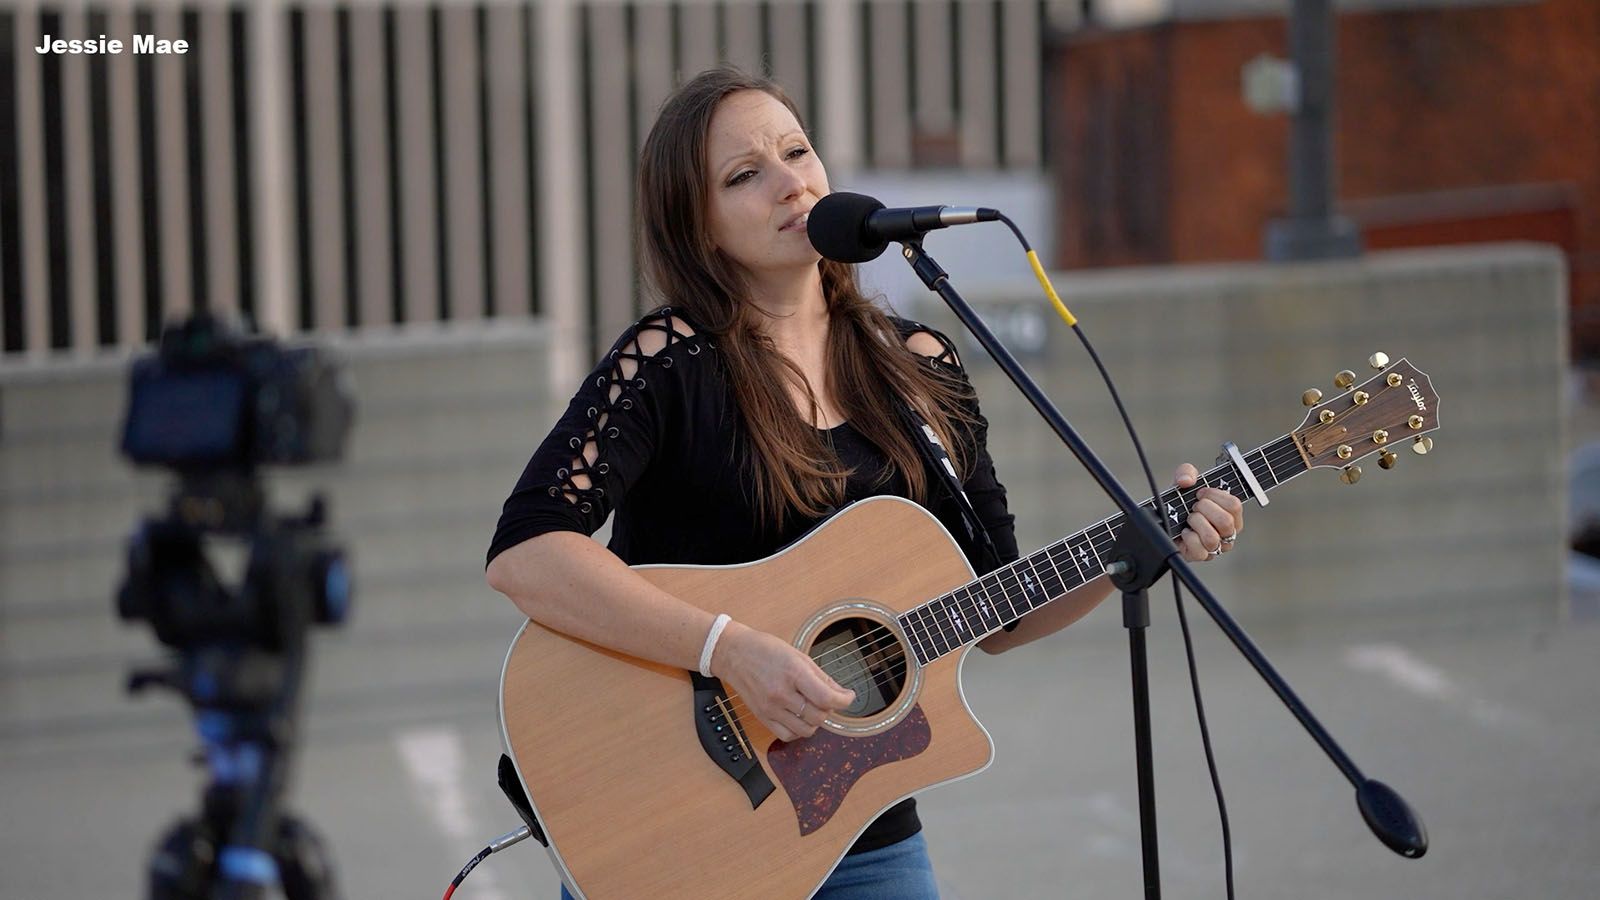 Singer-songwriter Jessie Mae will be among the musical acts at this year's West Central ArtsFest.